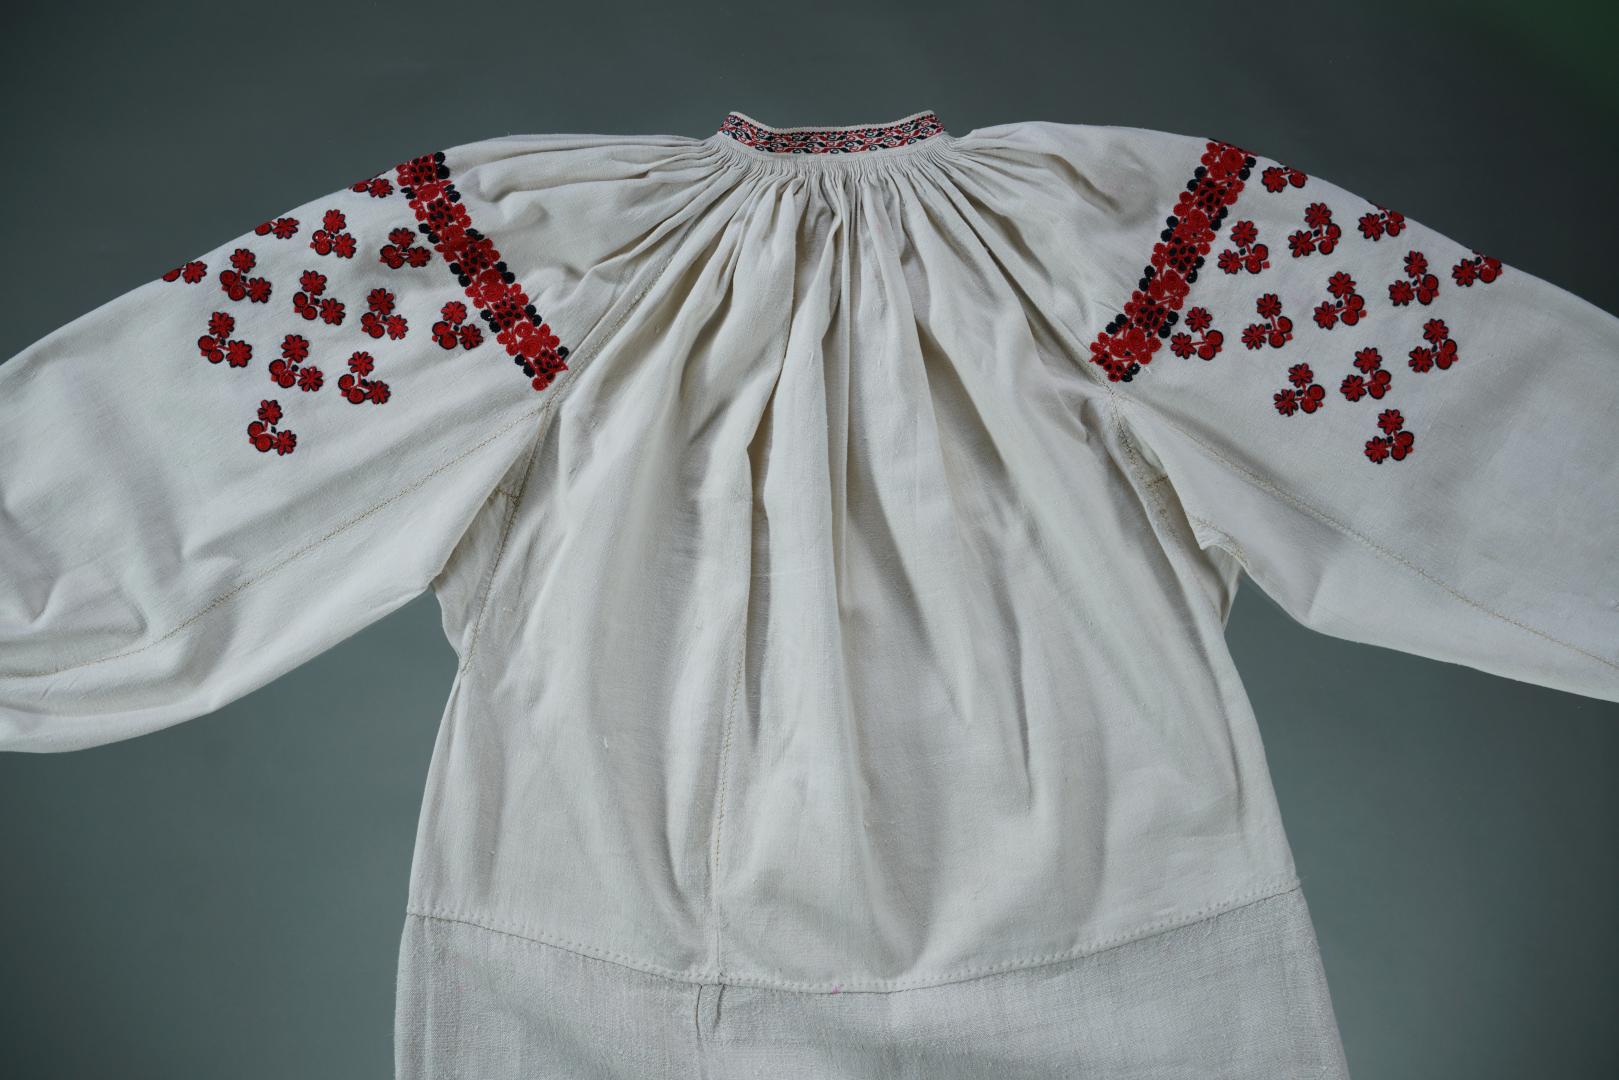 Women's embroidered shirt